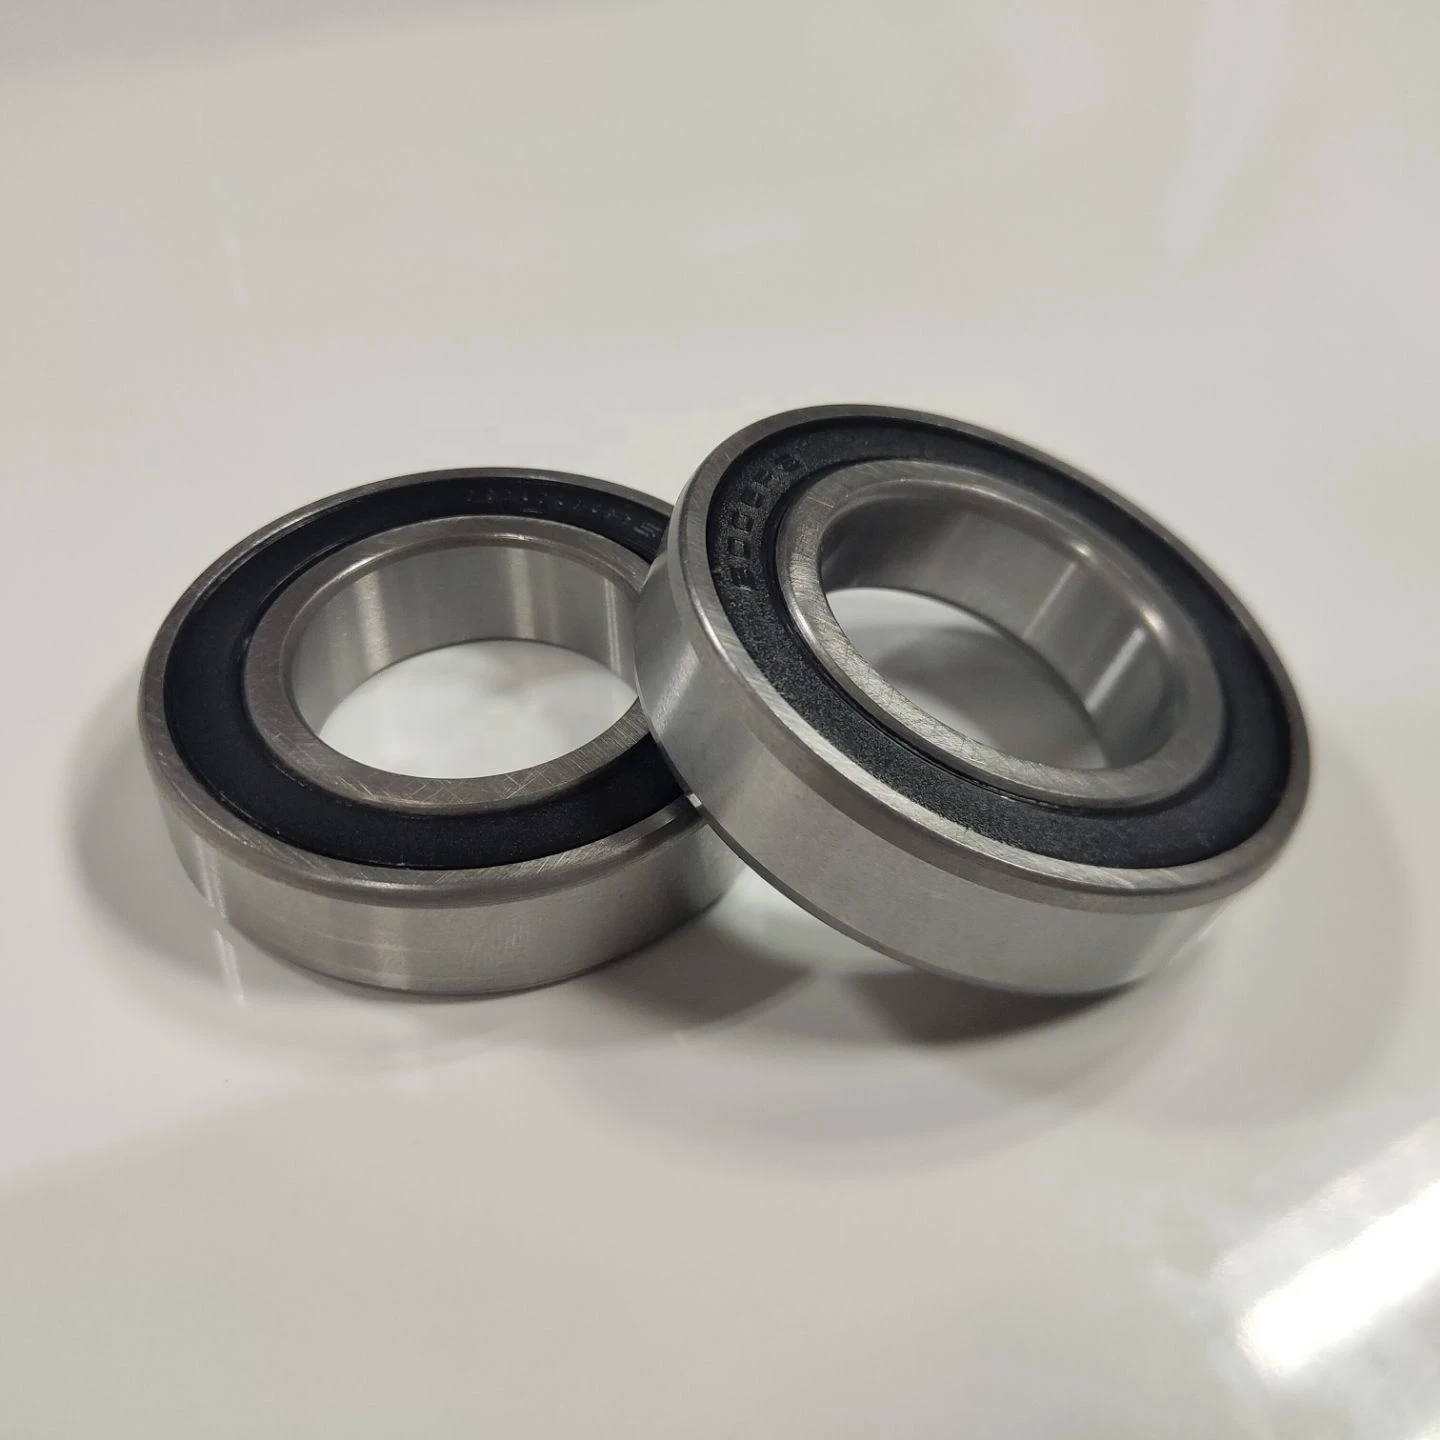 6300 6301 6201 6202 6203 auto spare parts bearing steel deep groove ball bearing